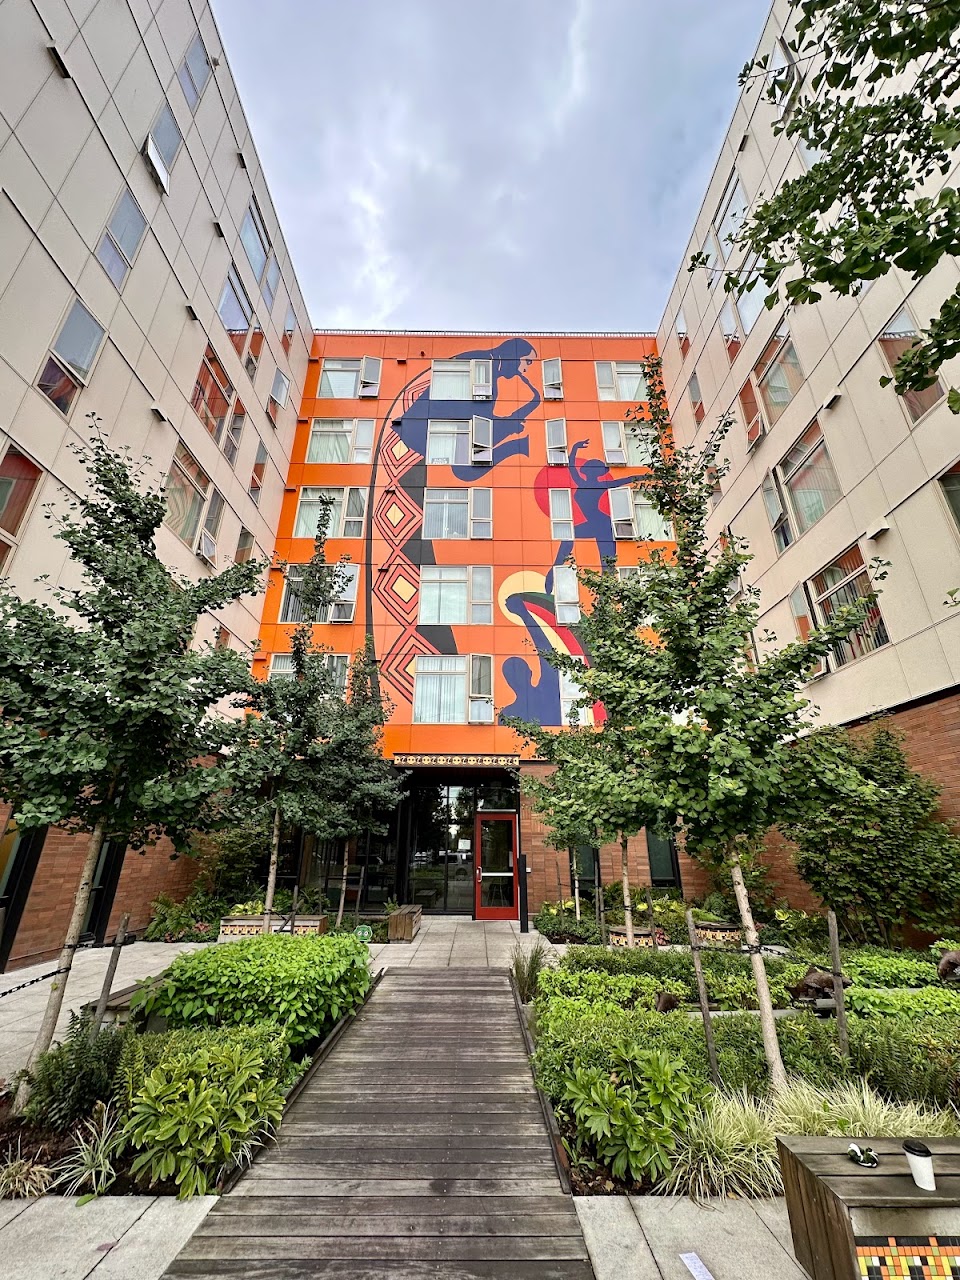 Photo of LIBERTY BANK BUILDING. Affordable housing located at 1405 24TH AVE. SEATTLE, WA 98122